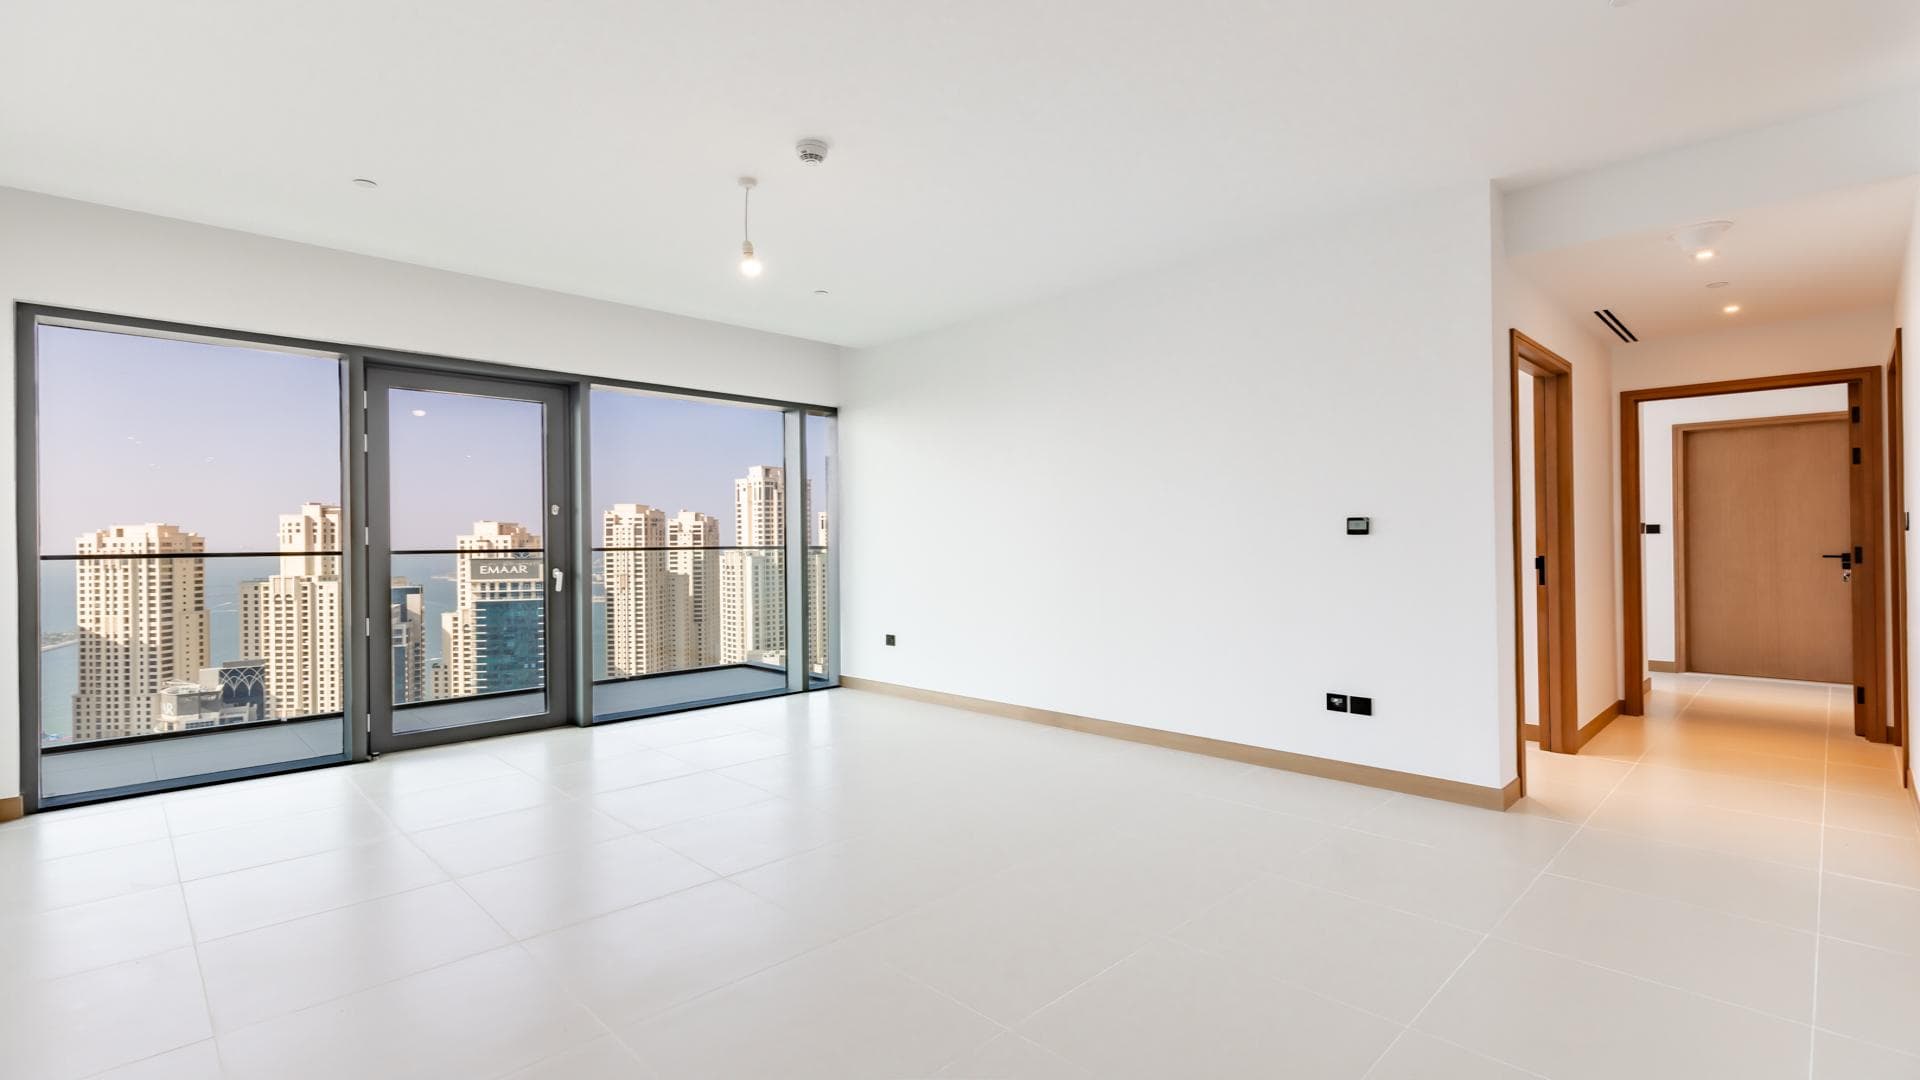 3 Bedroom Apartment For Sale Burj Place Tower 2 Lp20368 Bf2cd5d6537a800.jpg